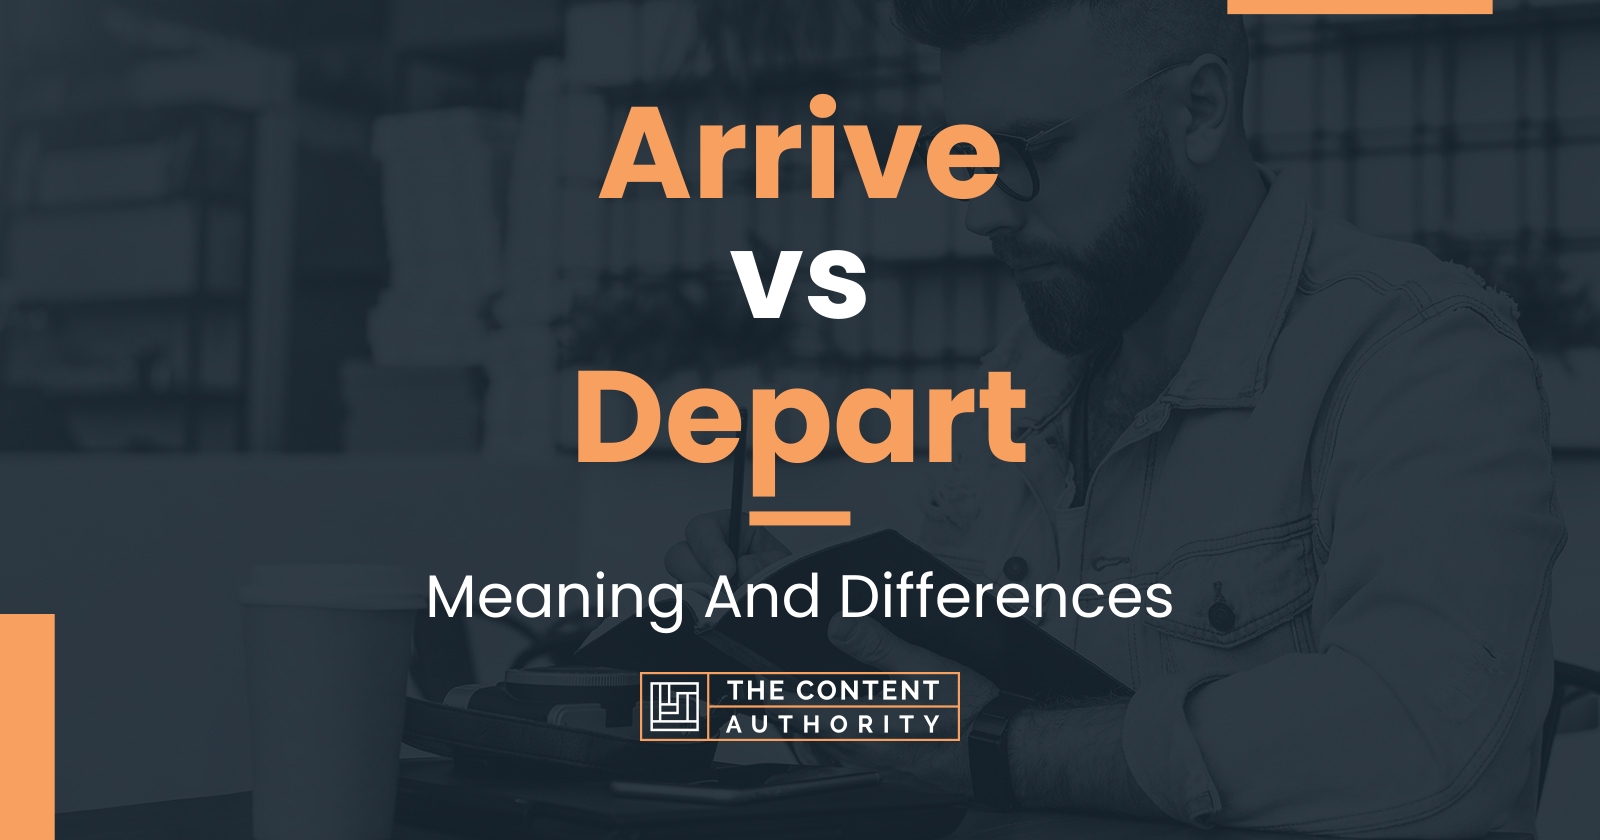 Arrive vs Depart: Meaning And Differences